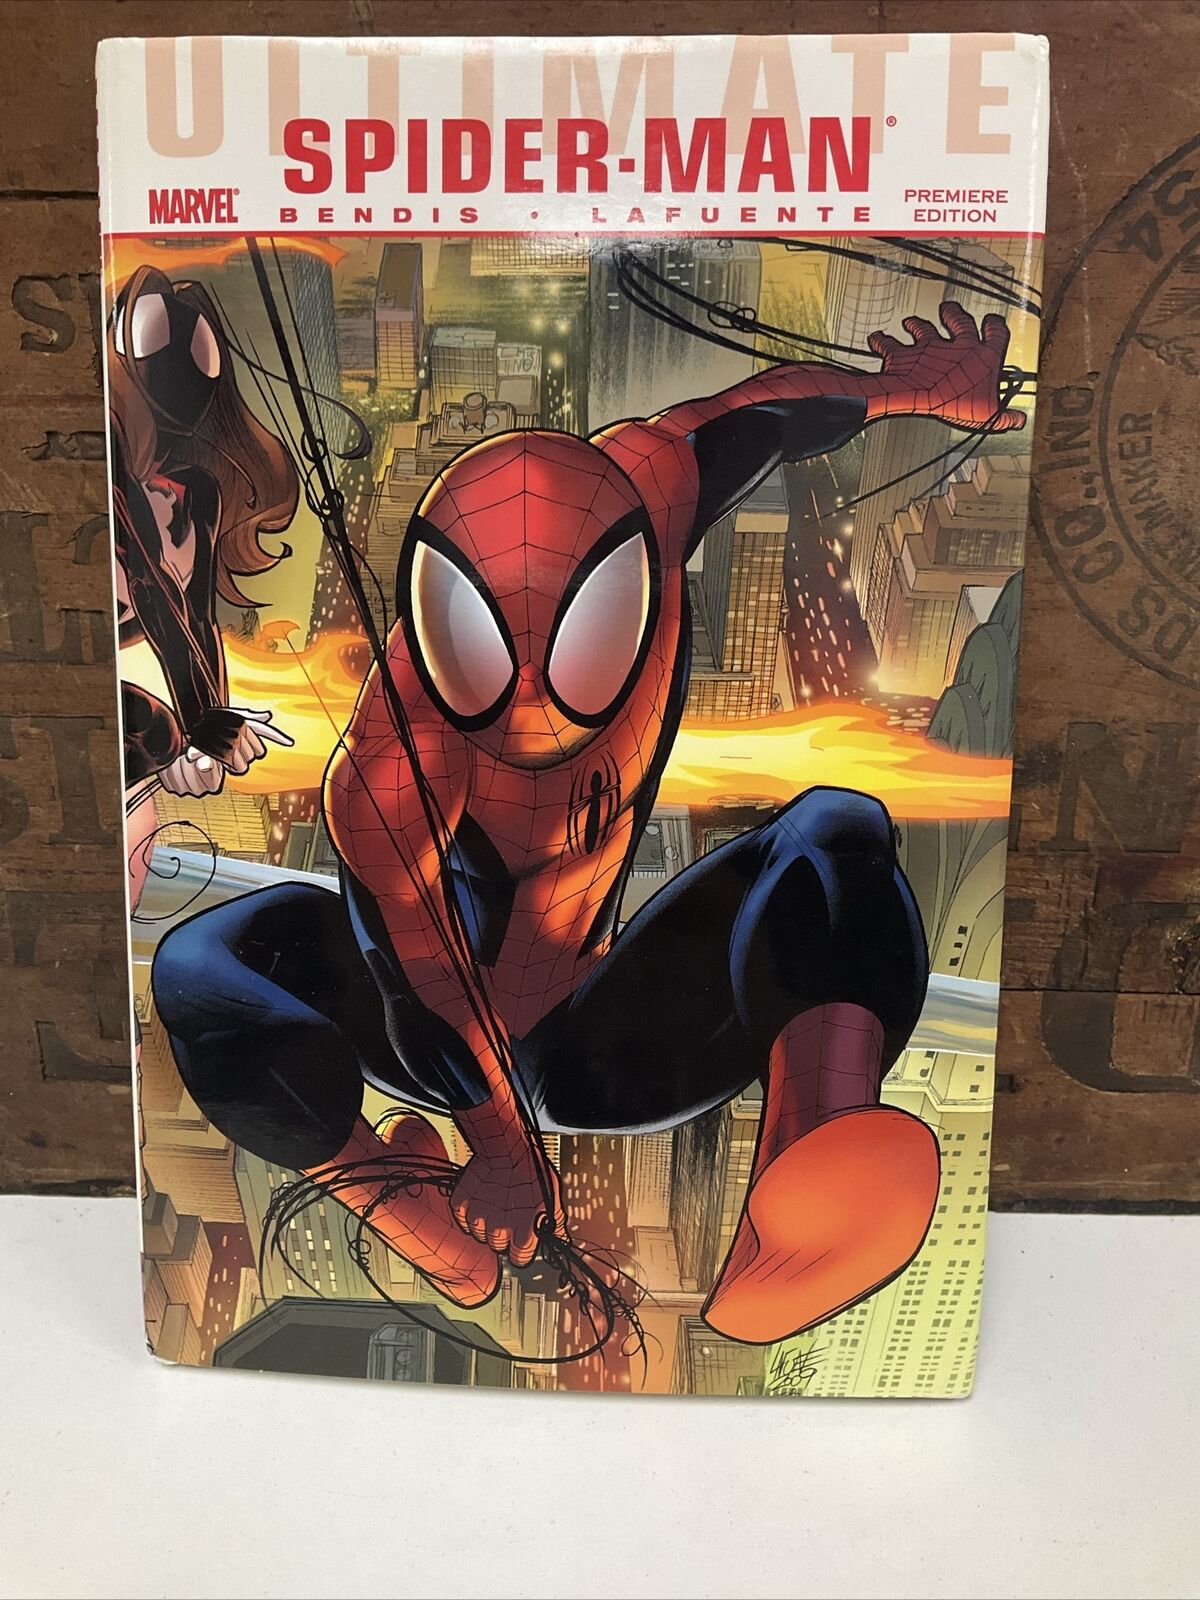 Marvel Ultimate Comics Spider-Man: The World According to Peter Parker #1-6 TPB